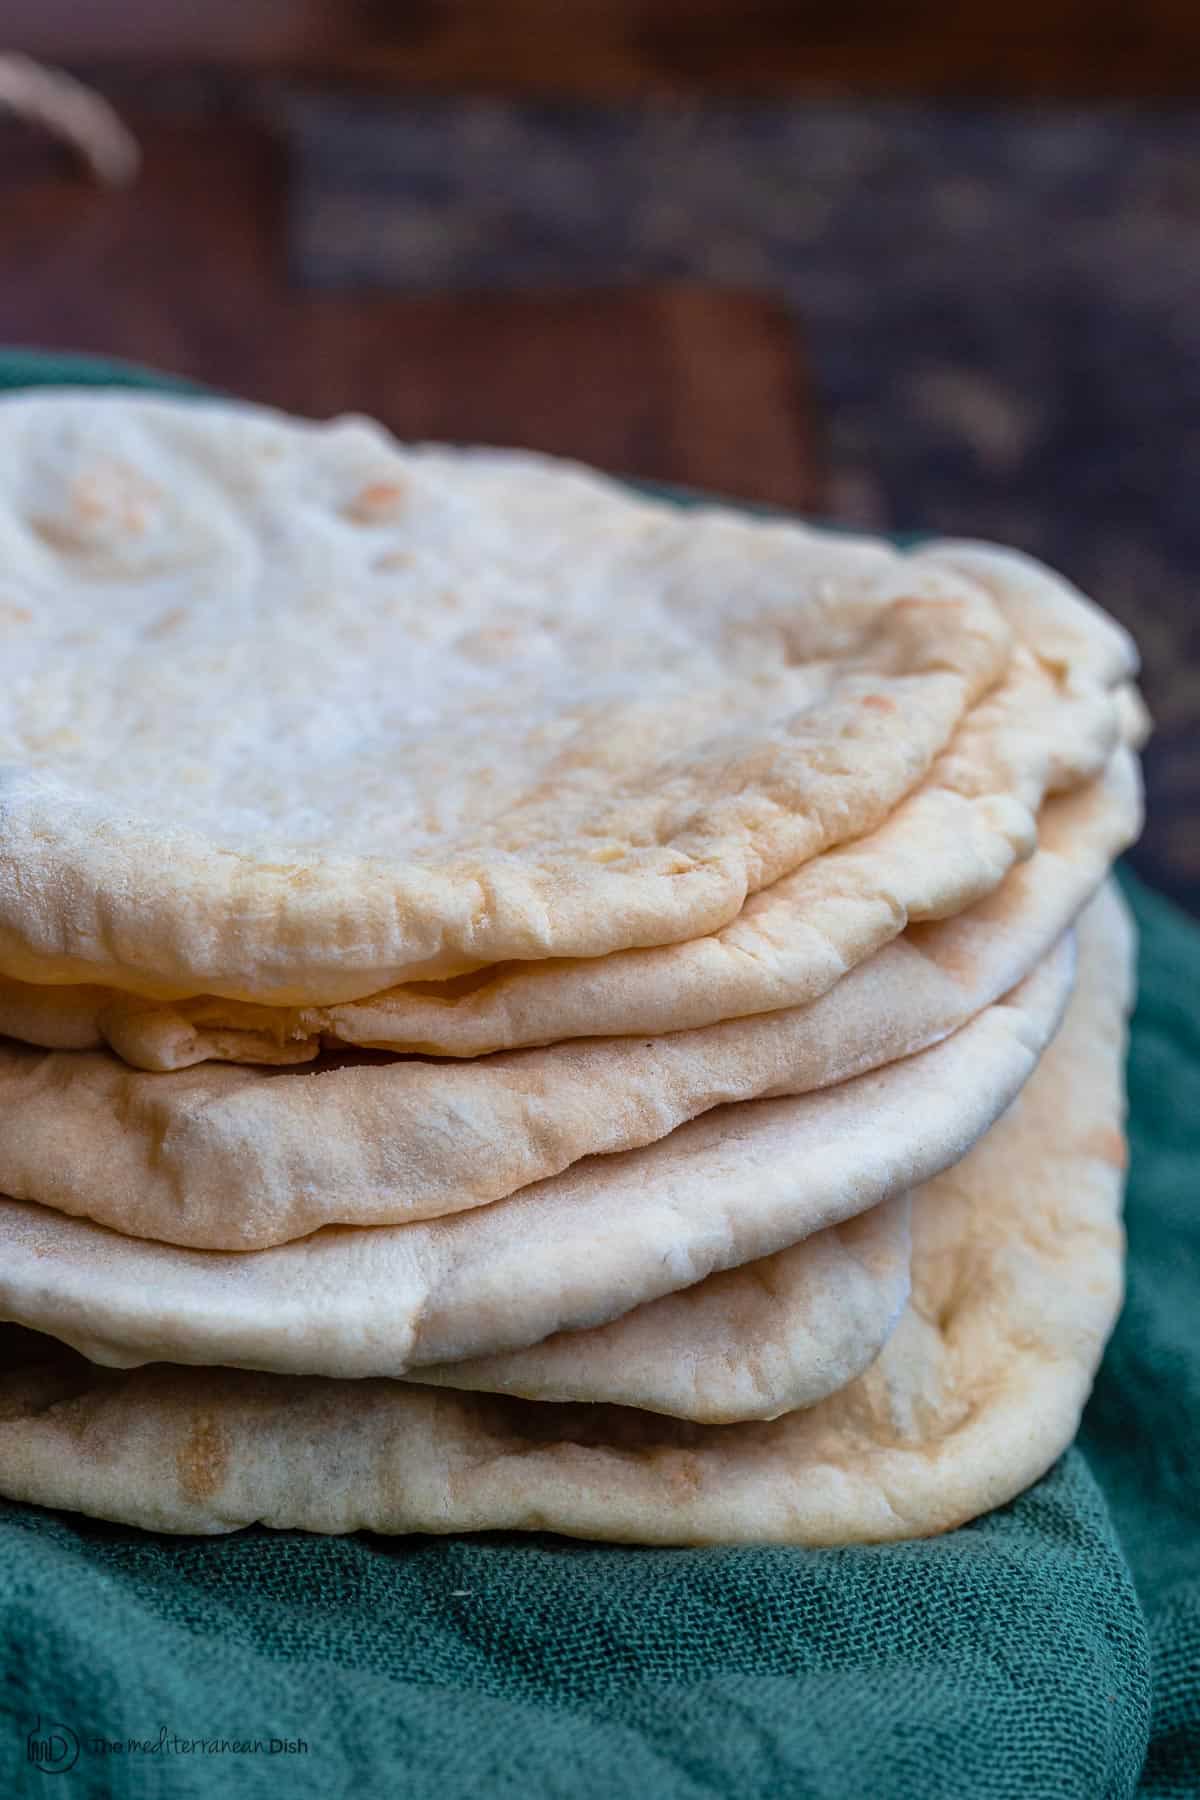 Stack of pita bread over a kitchen towel